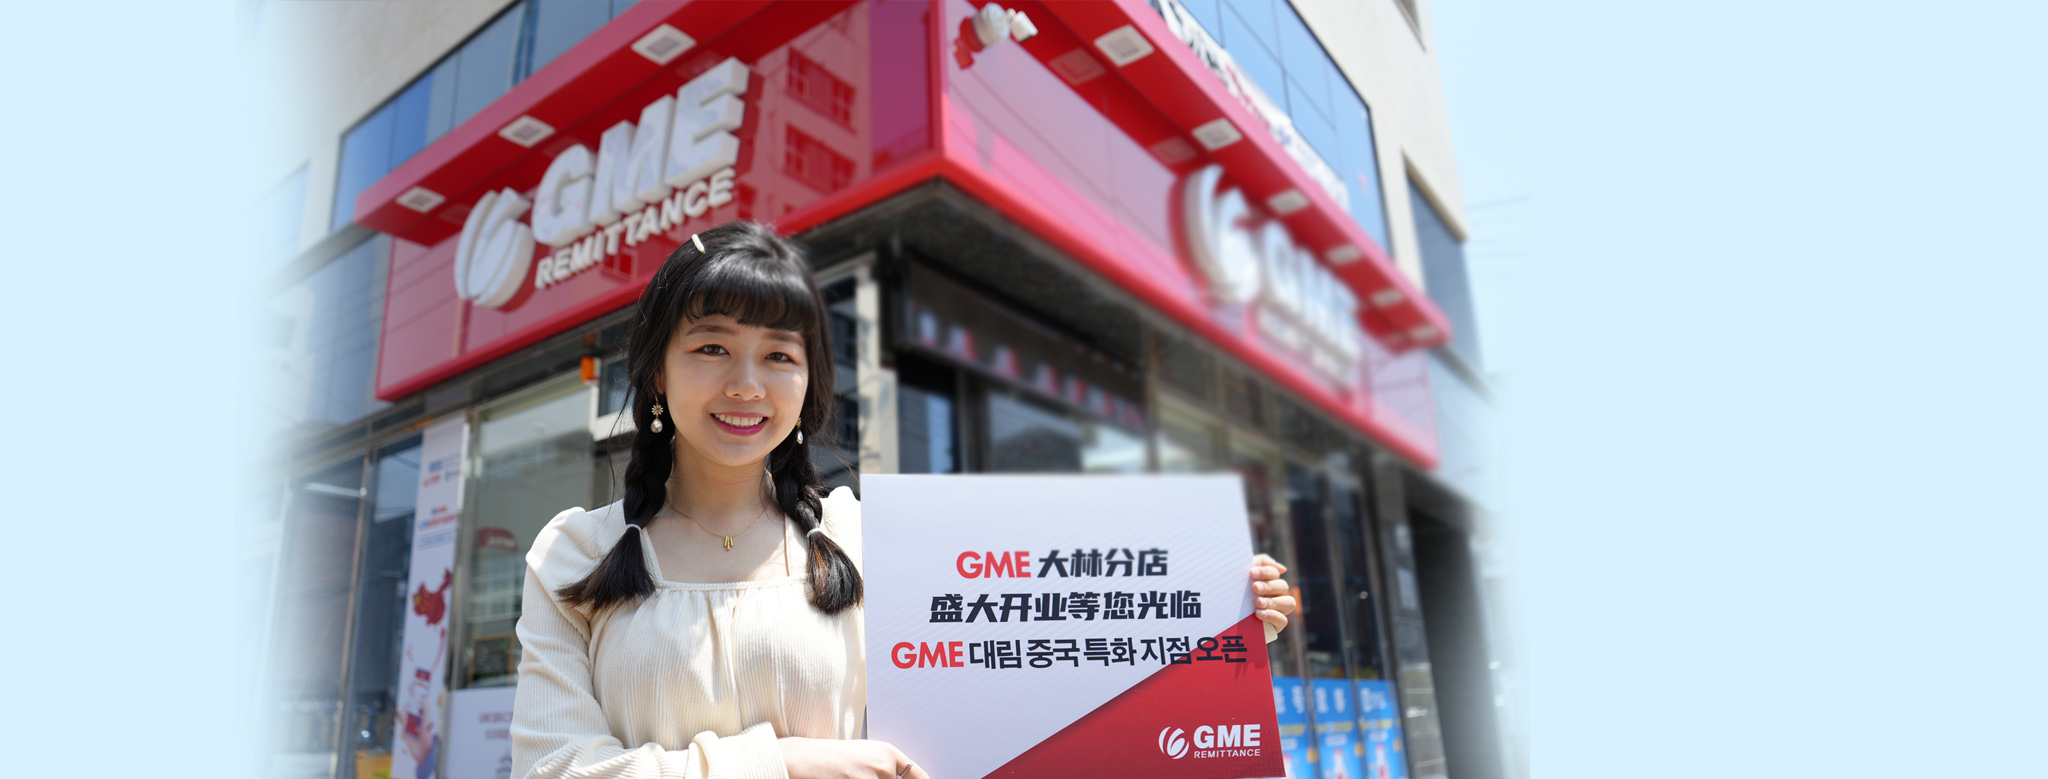 GME Daerim branch officially launched in Dearim-dong.